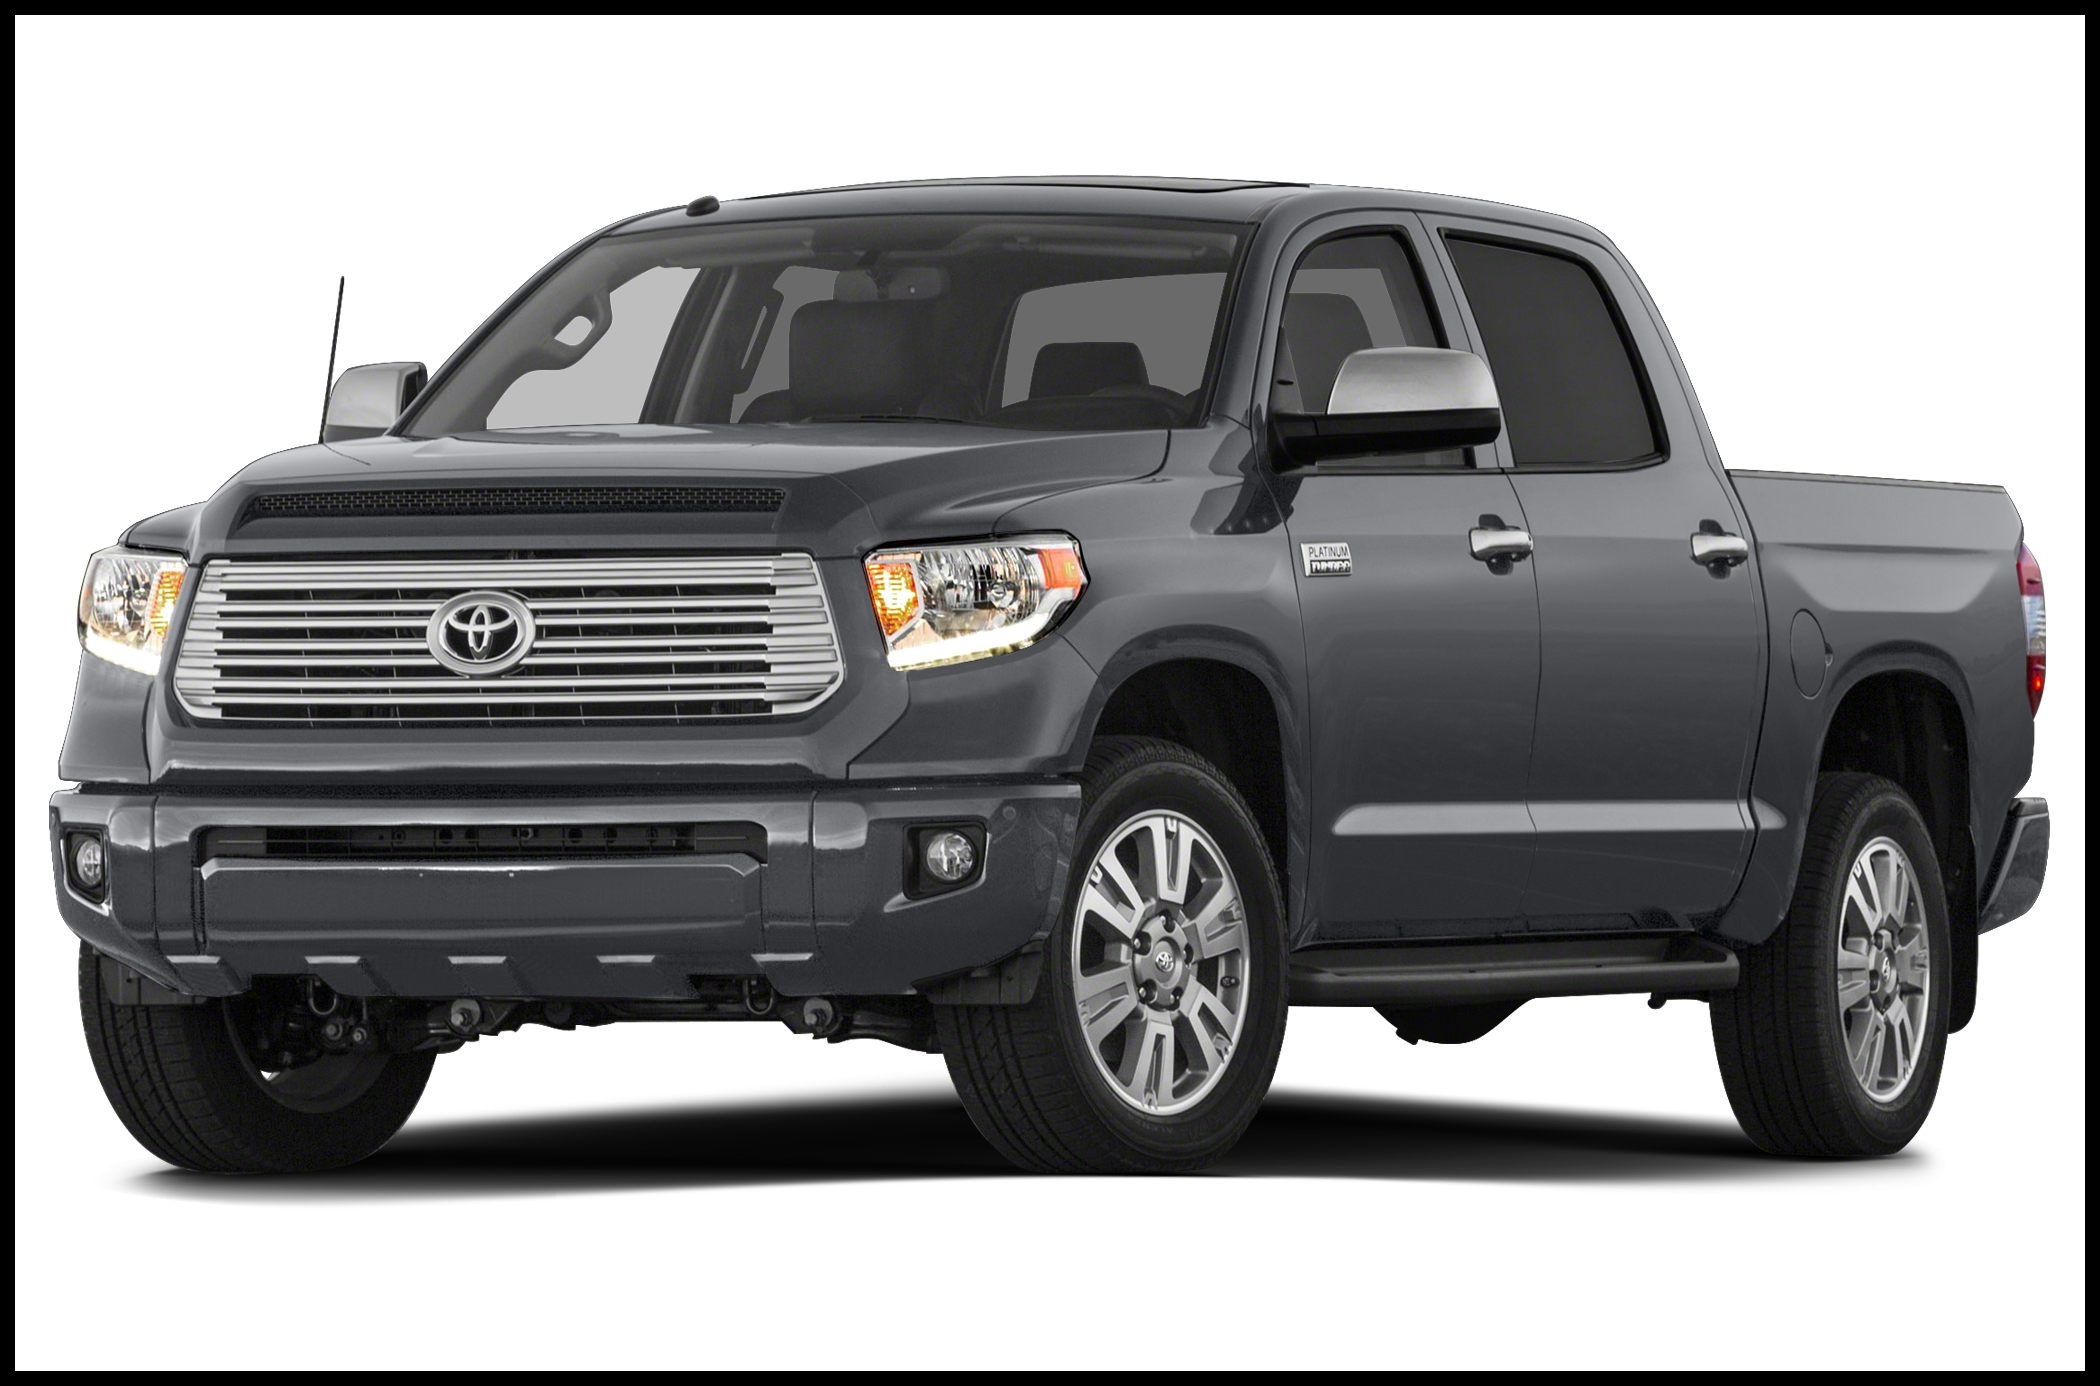 News 2015 ford F 150 Vs 2015 Nissan Titan and 2015 toyota Tundra Overview Reviews and